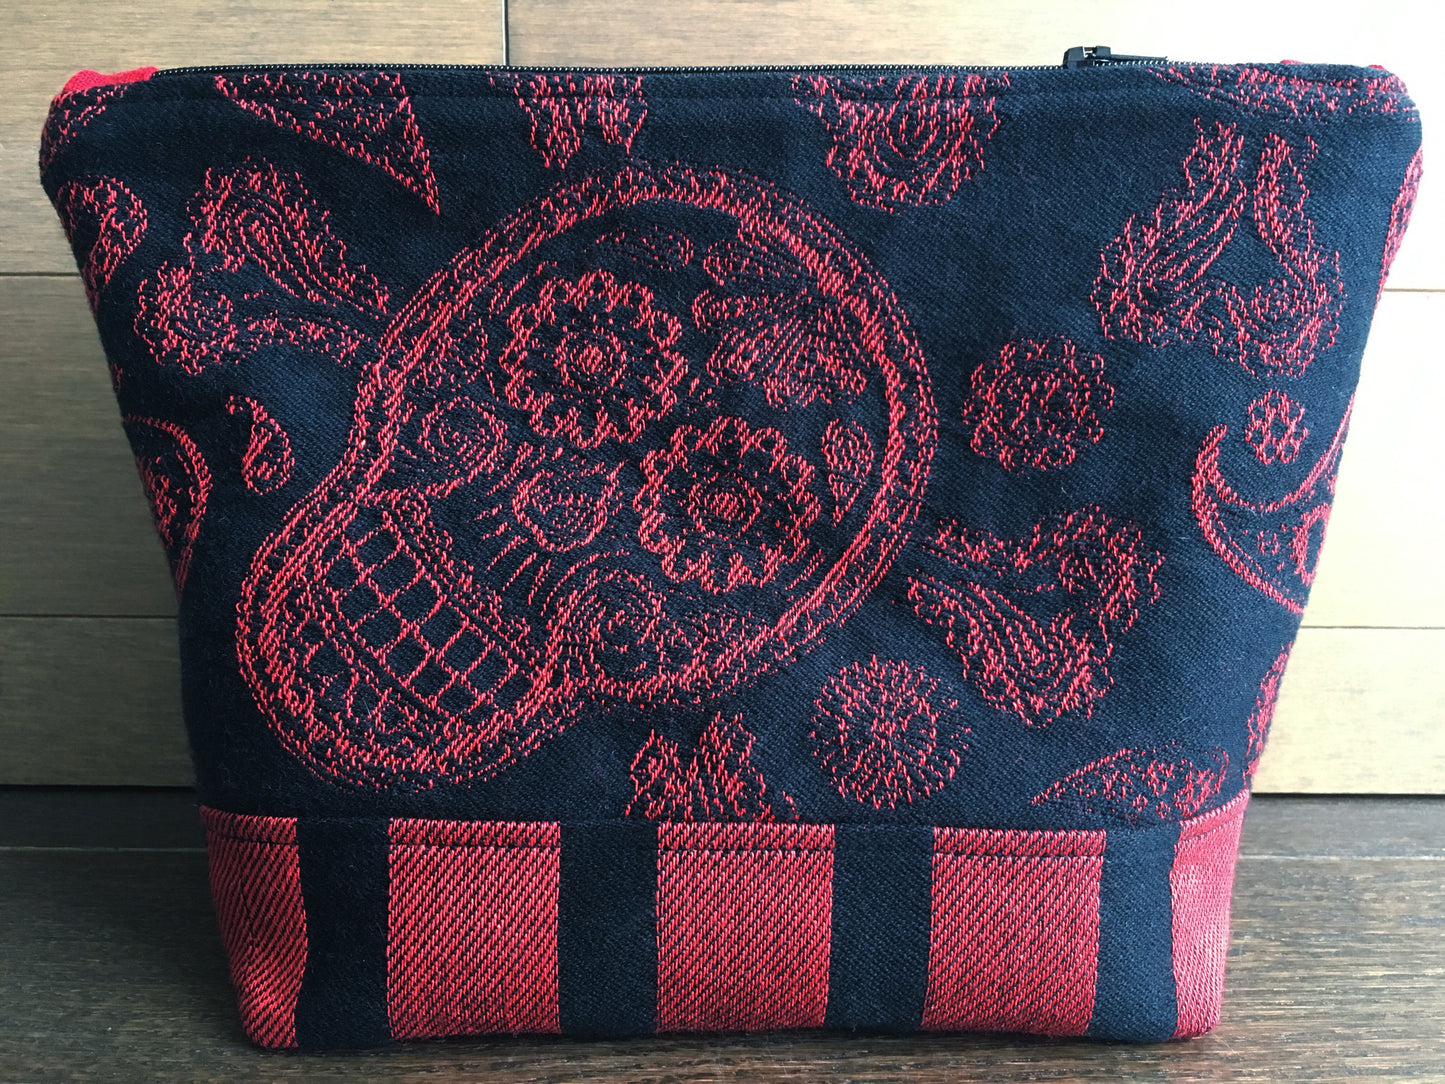 Image of a large handmade pirate themed essential oil organizer. It features a large skull and crossbones embroidery on faux alligator leather, bold red and black skull woven textile. The inside is made from blood red linen and skelewags fabric from Alexander Henry. It  has 10 built in pockets and 3 inserts with 3 pockets each.  